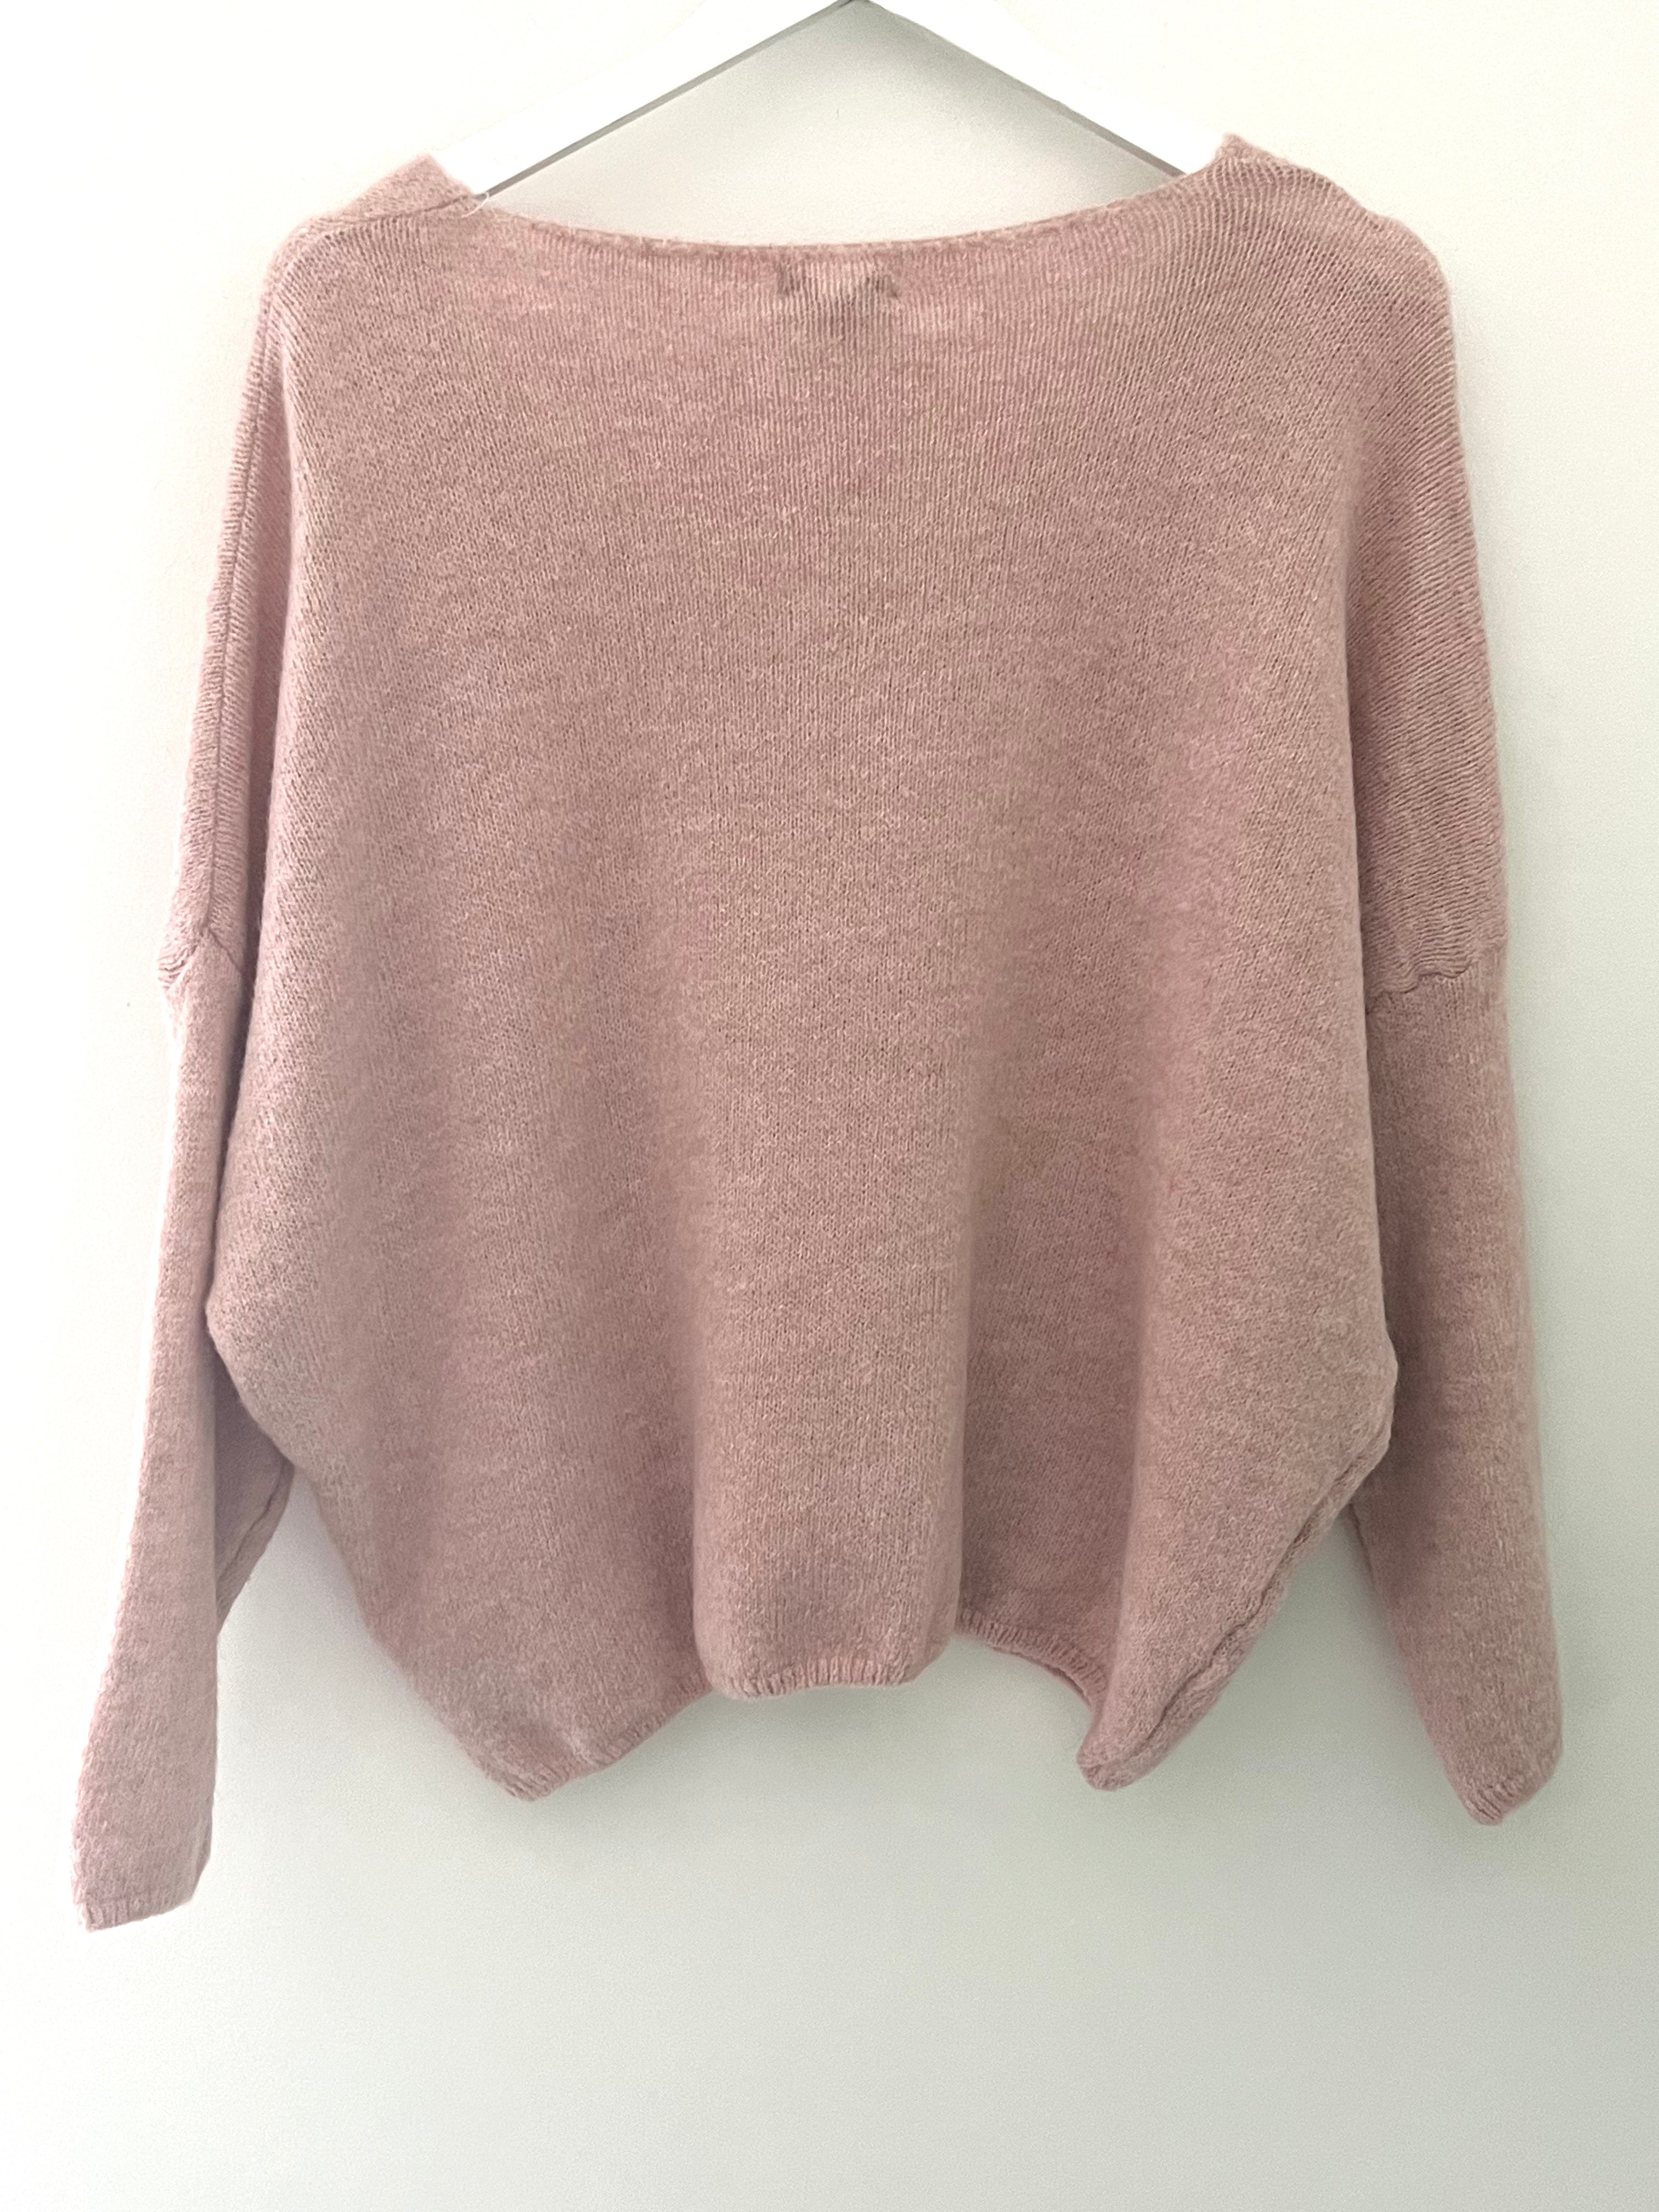 Cosy Heart Jumper in Soft Pink